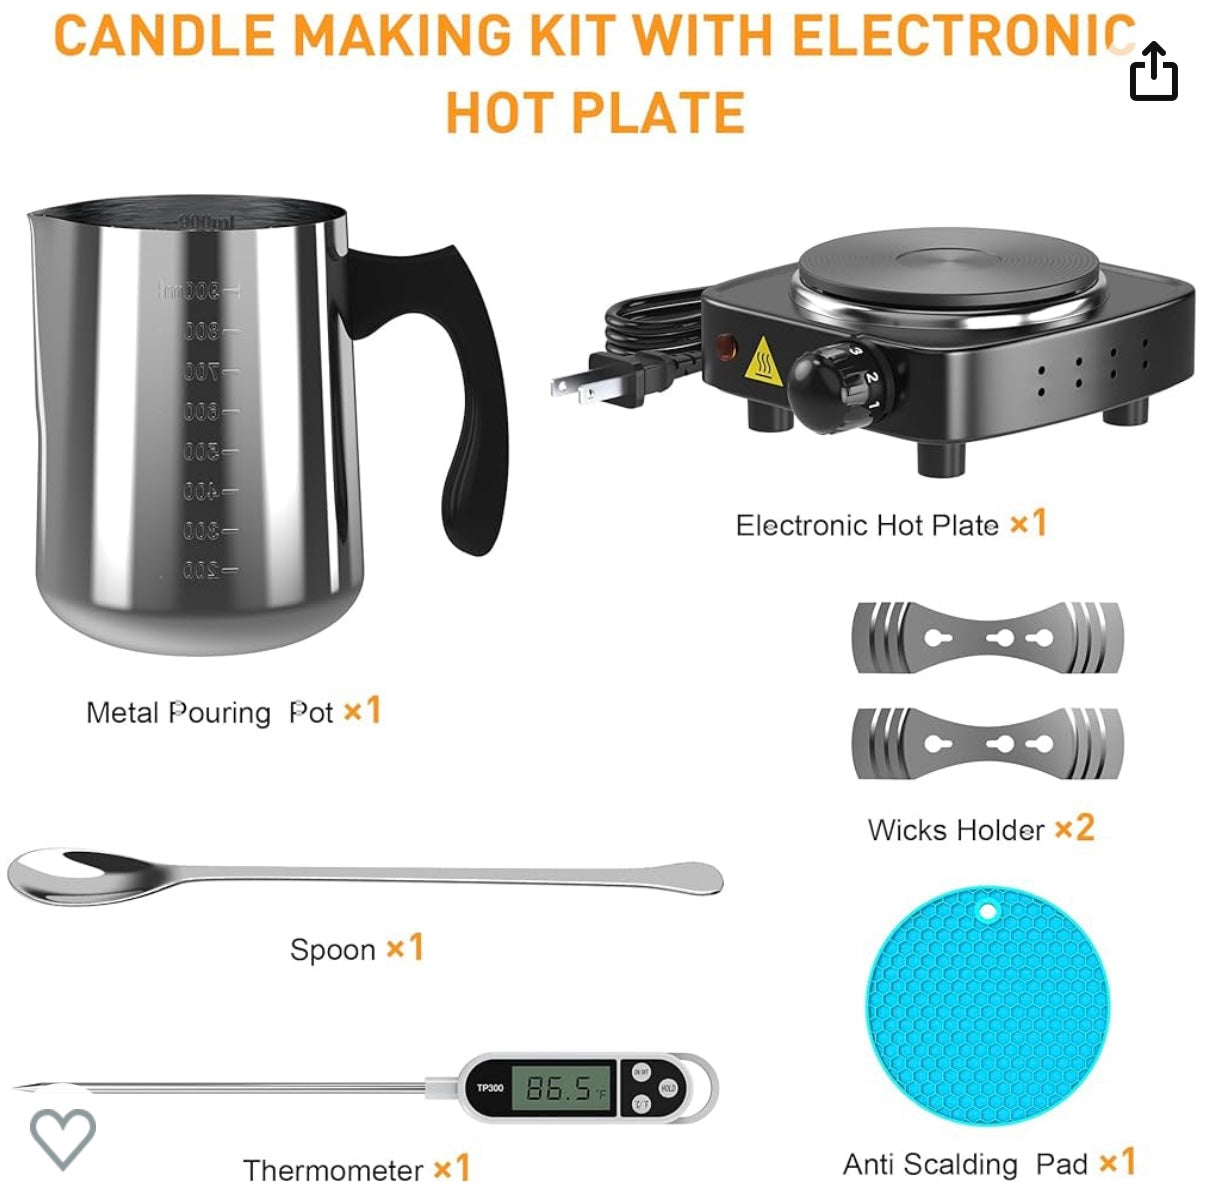 Candle Making Kit with Electronic Hot Plate, Candle Making Kit for Adults, DIY Starter Candle Making Supplies, with 900ml Candle Make Pouring Pot, Stirring Spoon, Wicks Holder, Thermometers